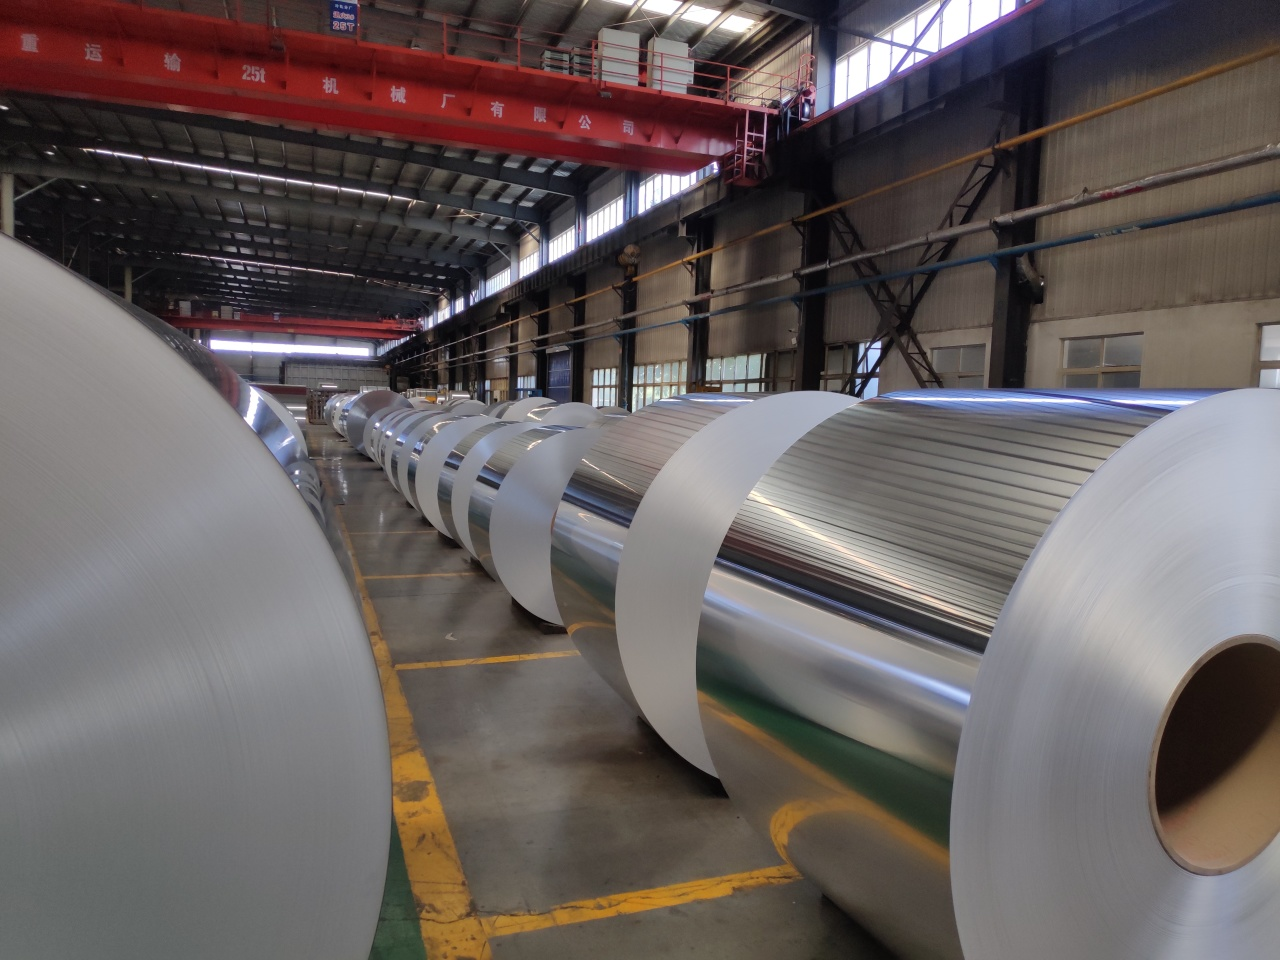 Longding Aluminum Industry Says "No" to "Nonconforming Products"